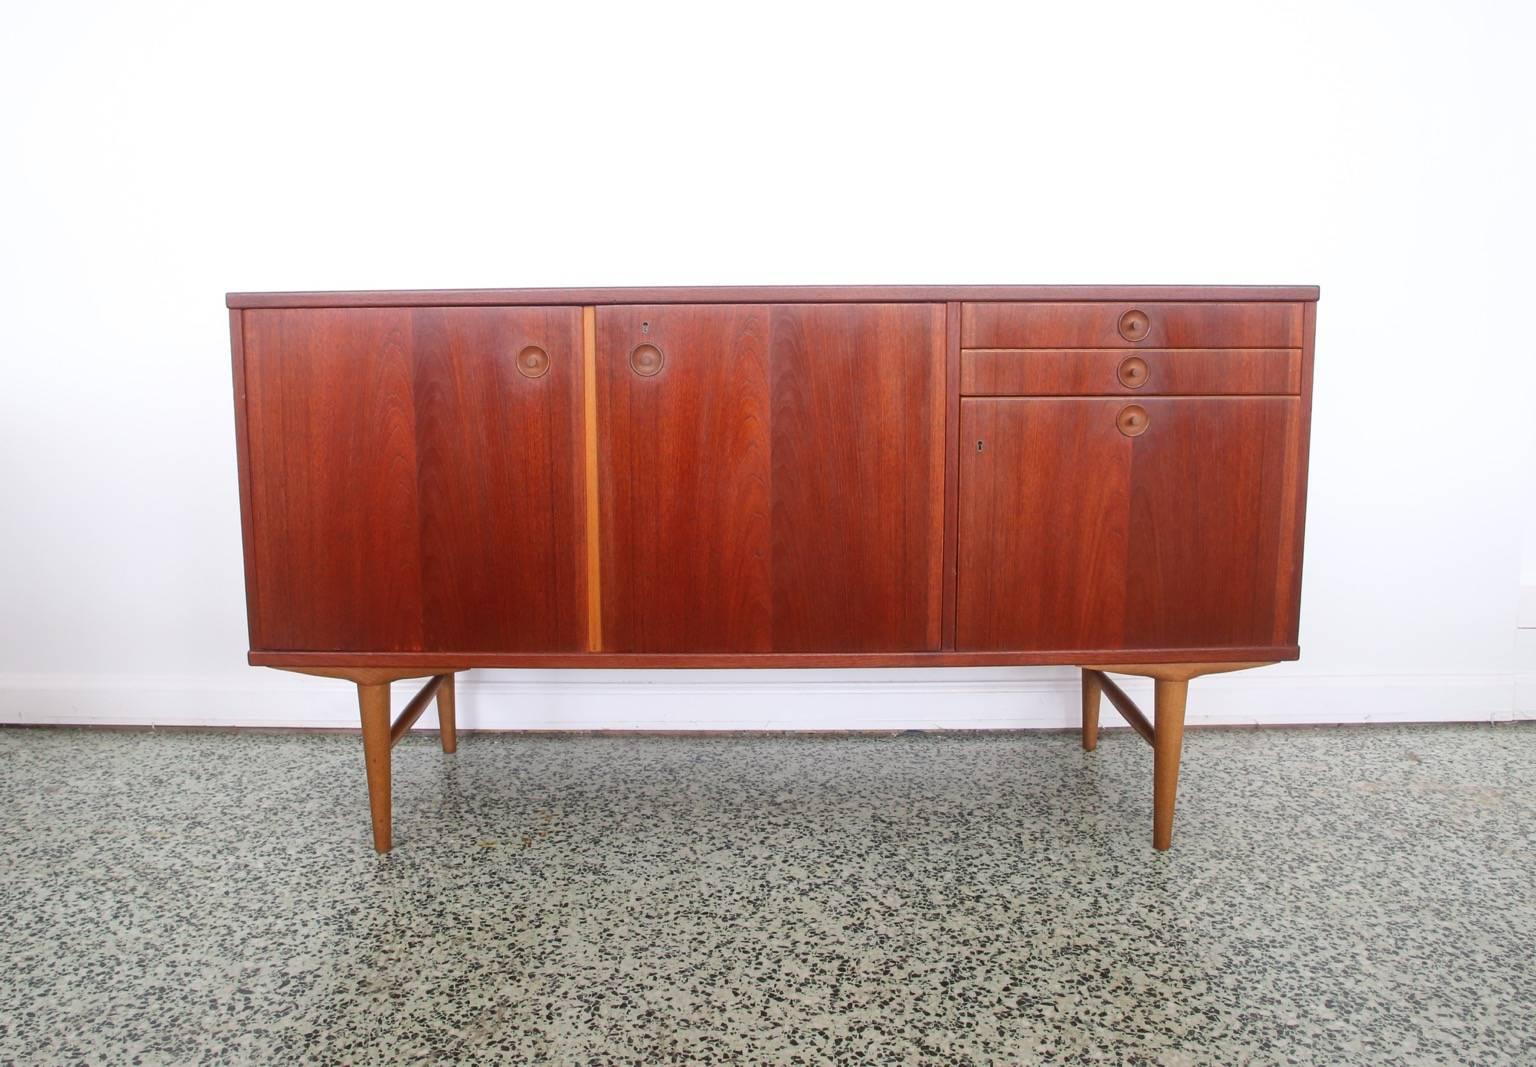 Very sleek Mid-Century Modern Swedish credenza by Abra Mobler. Doors open to reveal shelving.